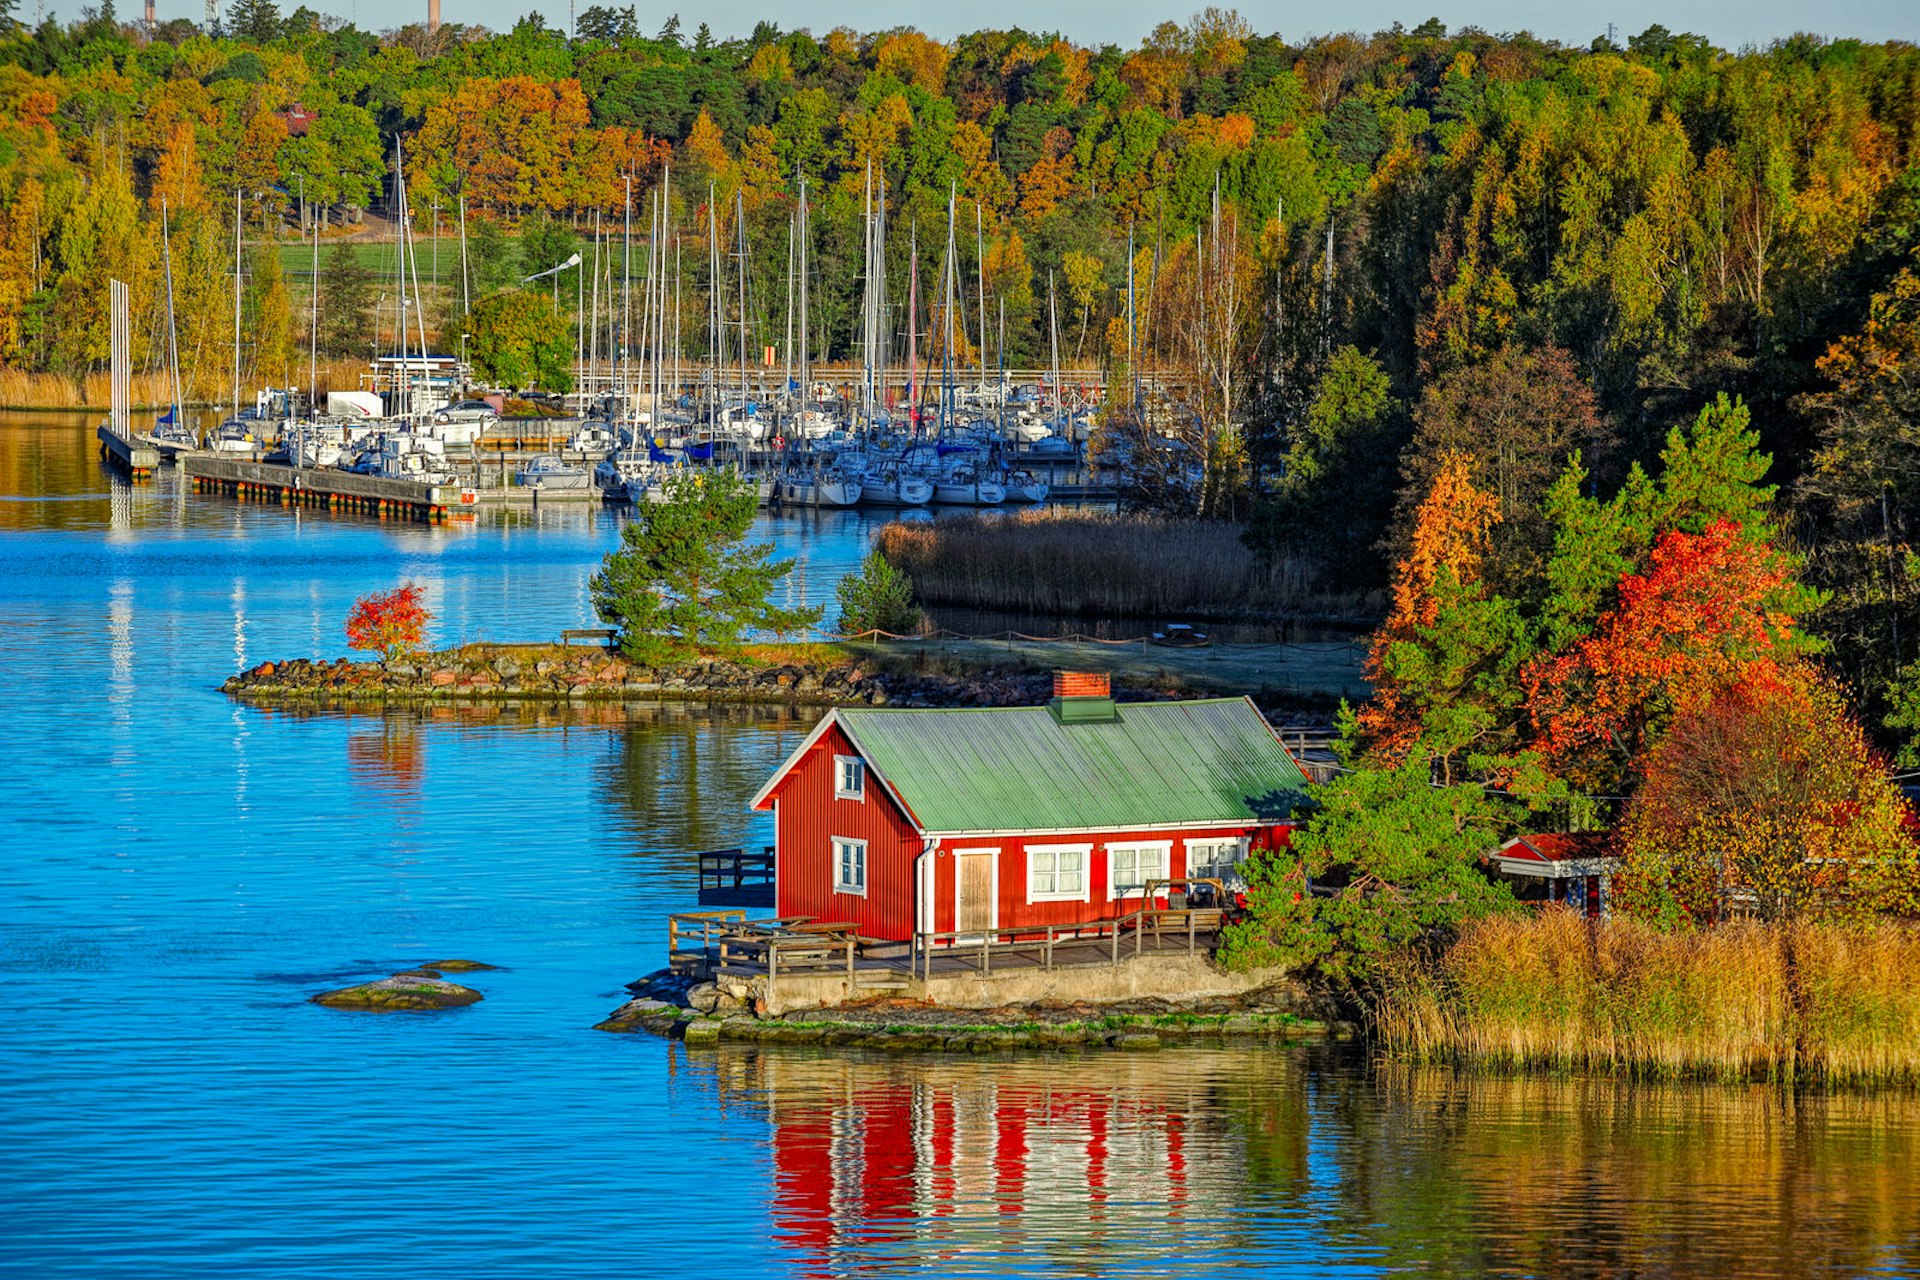 Finland’s islands are arguably just as peaceful as Moominvalley © Igor Grochev / Shutterstock